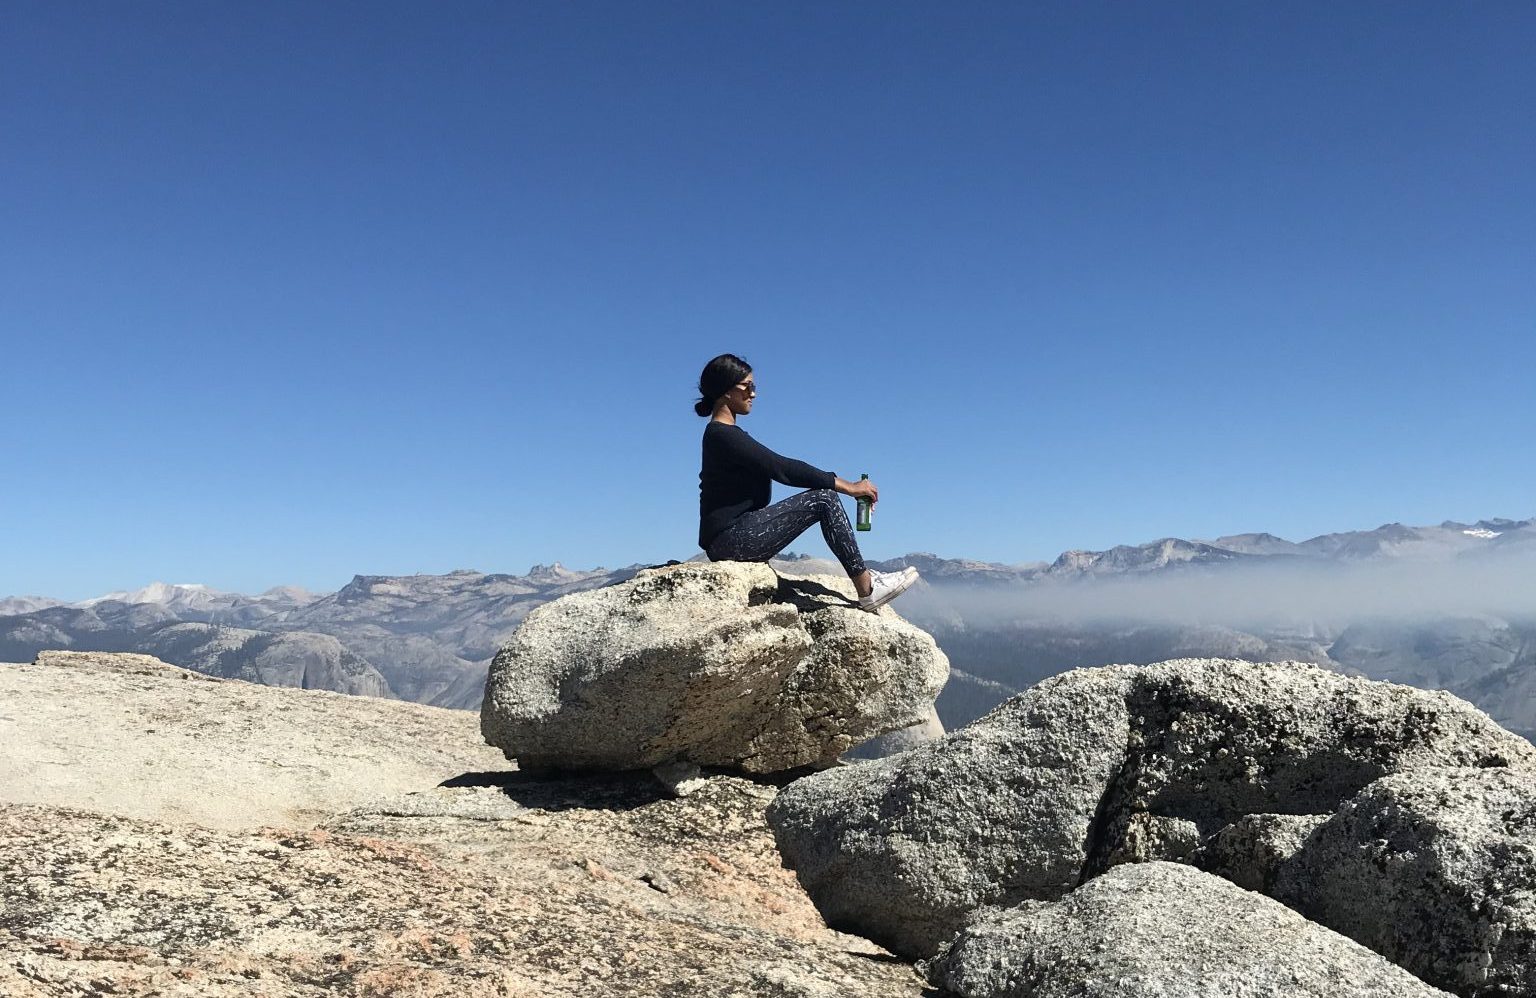 me sitting on a rock, in the Yosemite national park